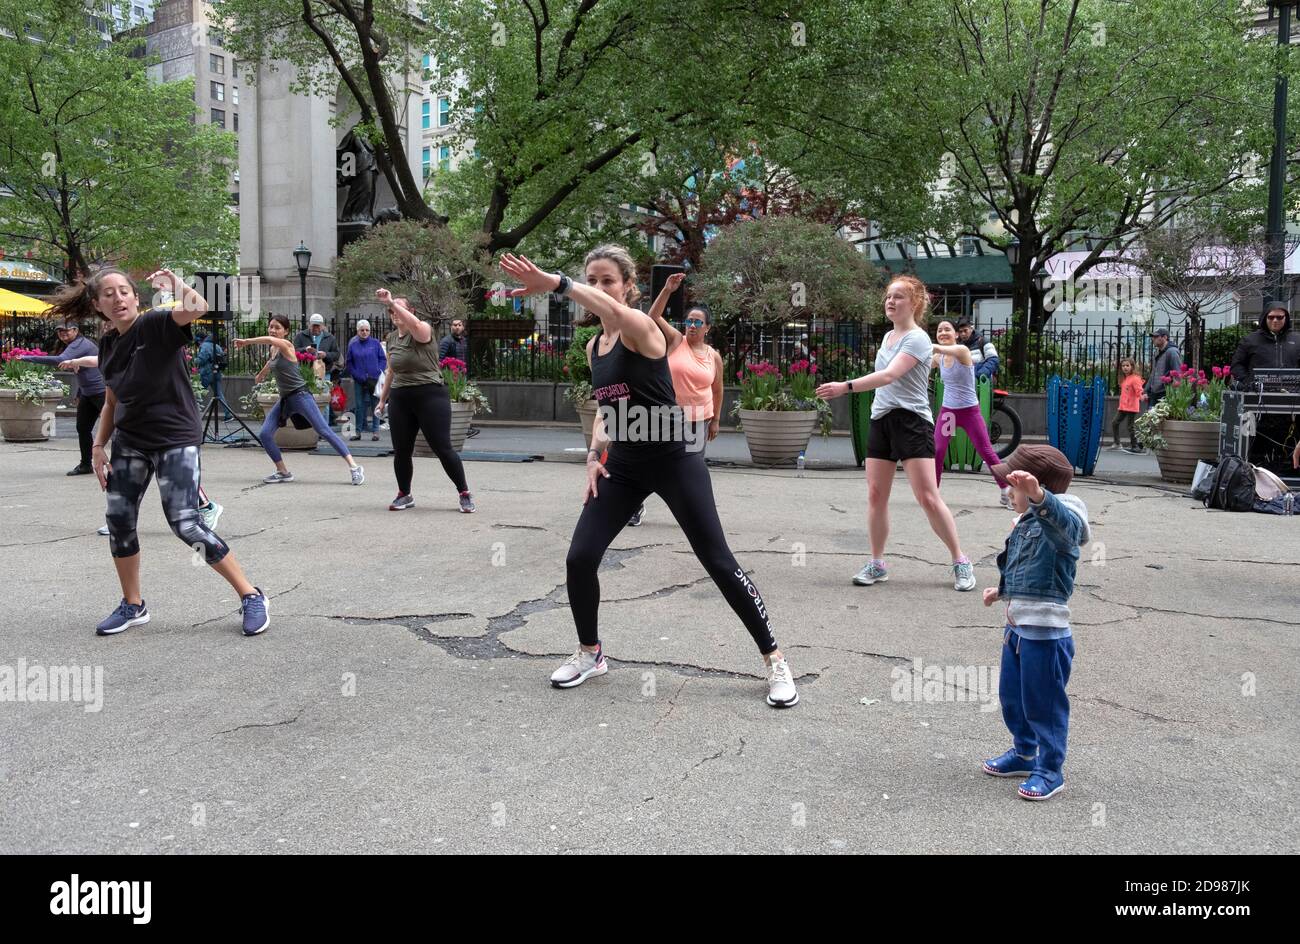 At an outdoor exercise class in Herald Square a young boy imitates the group leader. On Midtown Manhattan, New York City. Stock Photo